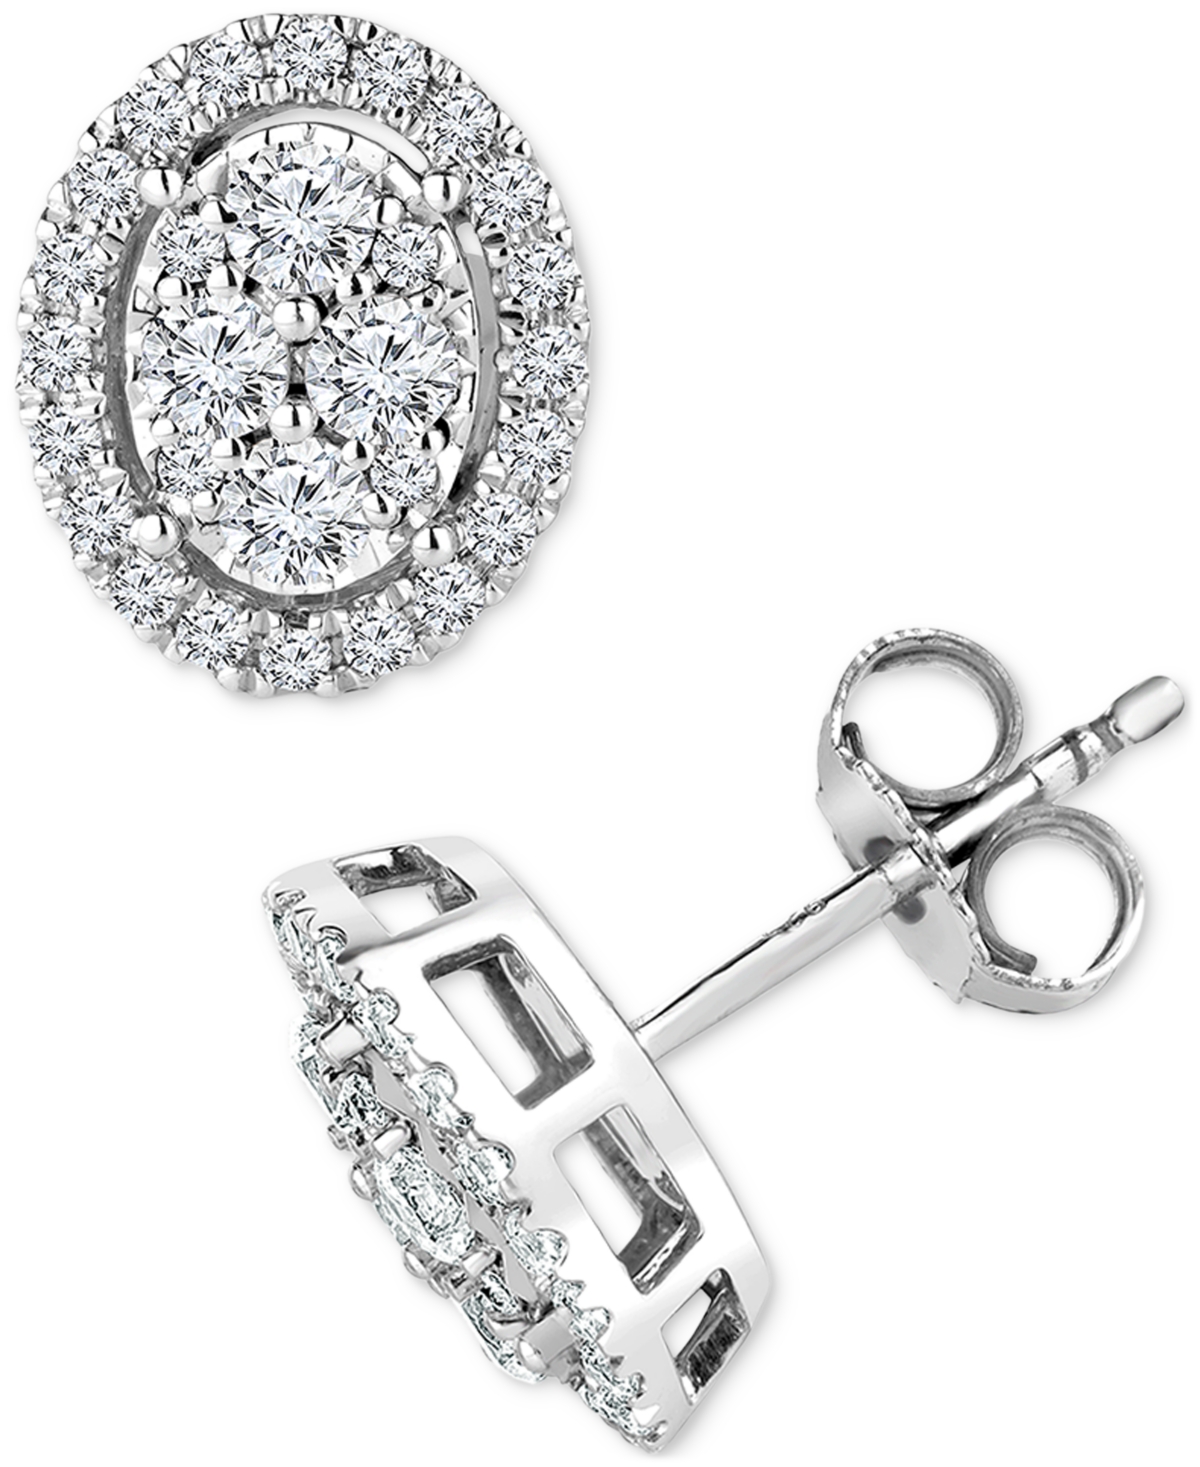 Diamond Halo Oval Cluster Halo Stud Earrings (1/3 ct. t.w.) in 14k White Gold - White Gold